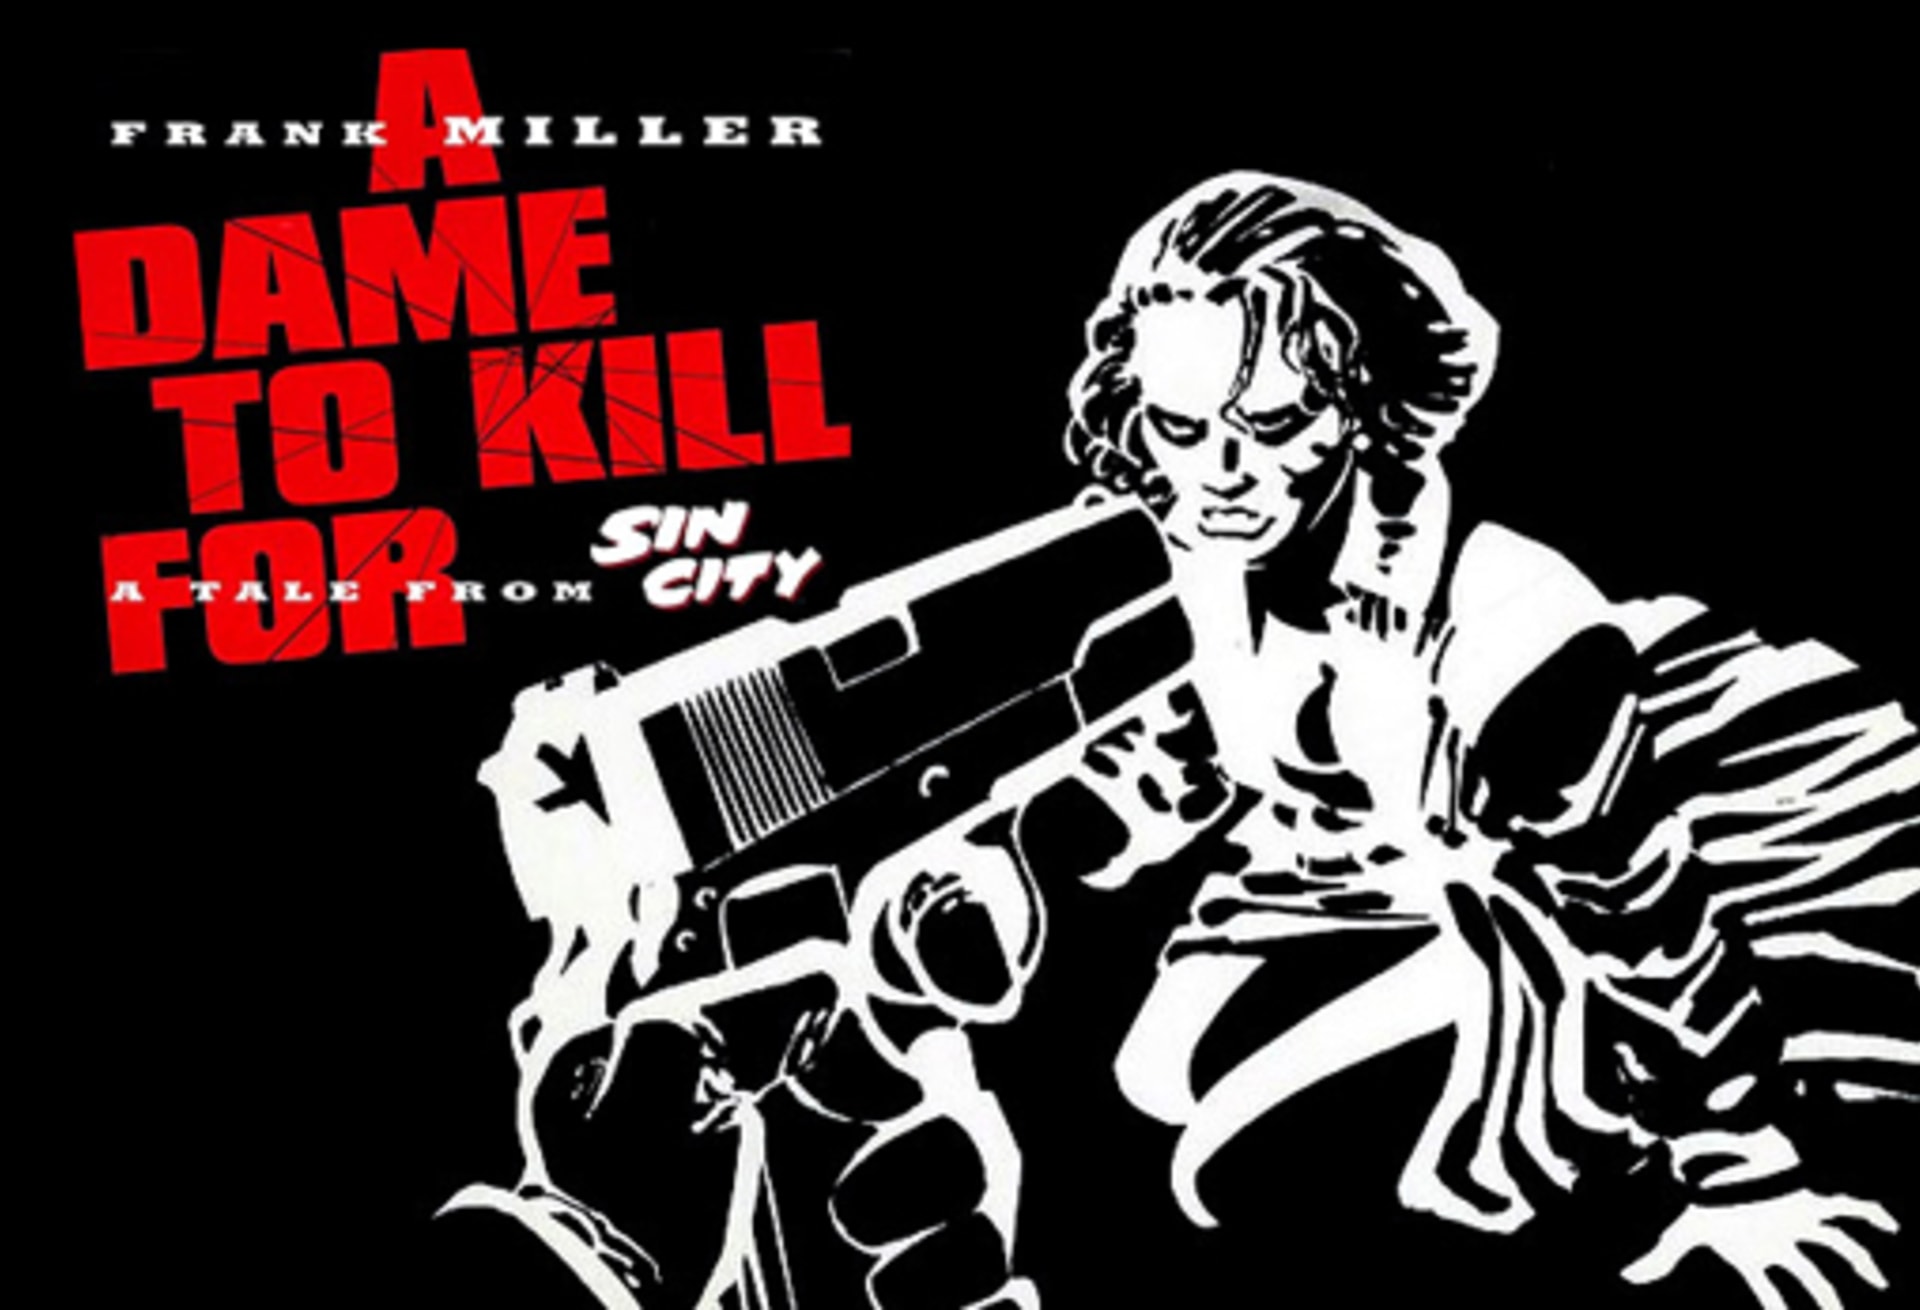 A Dame to Kill For